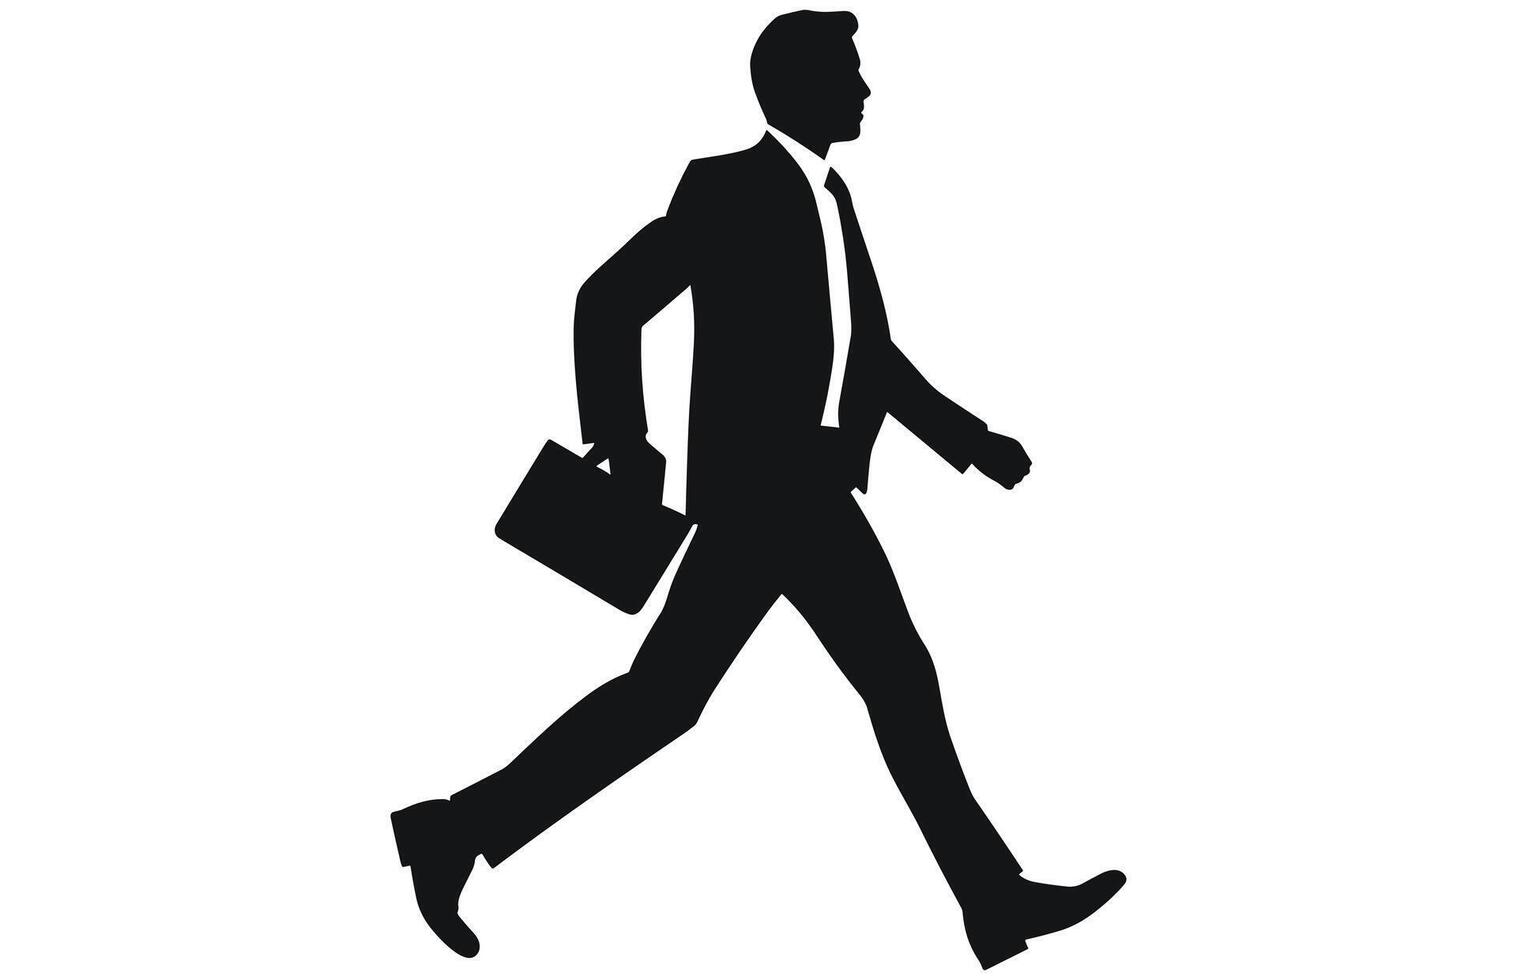 Businessman walking with a small bag silhouette, silhouette of worker or businessman in suit walking with a small bag vector